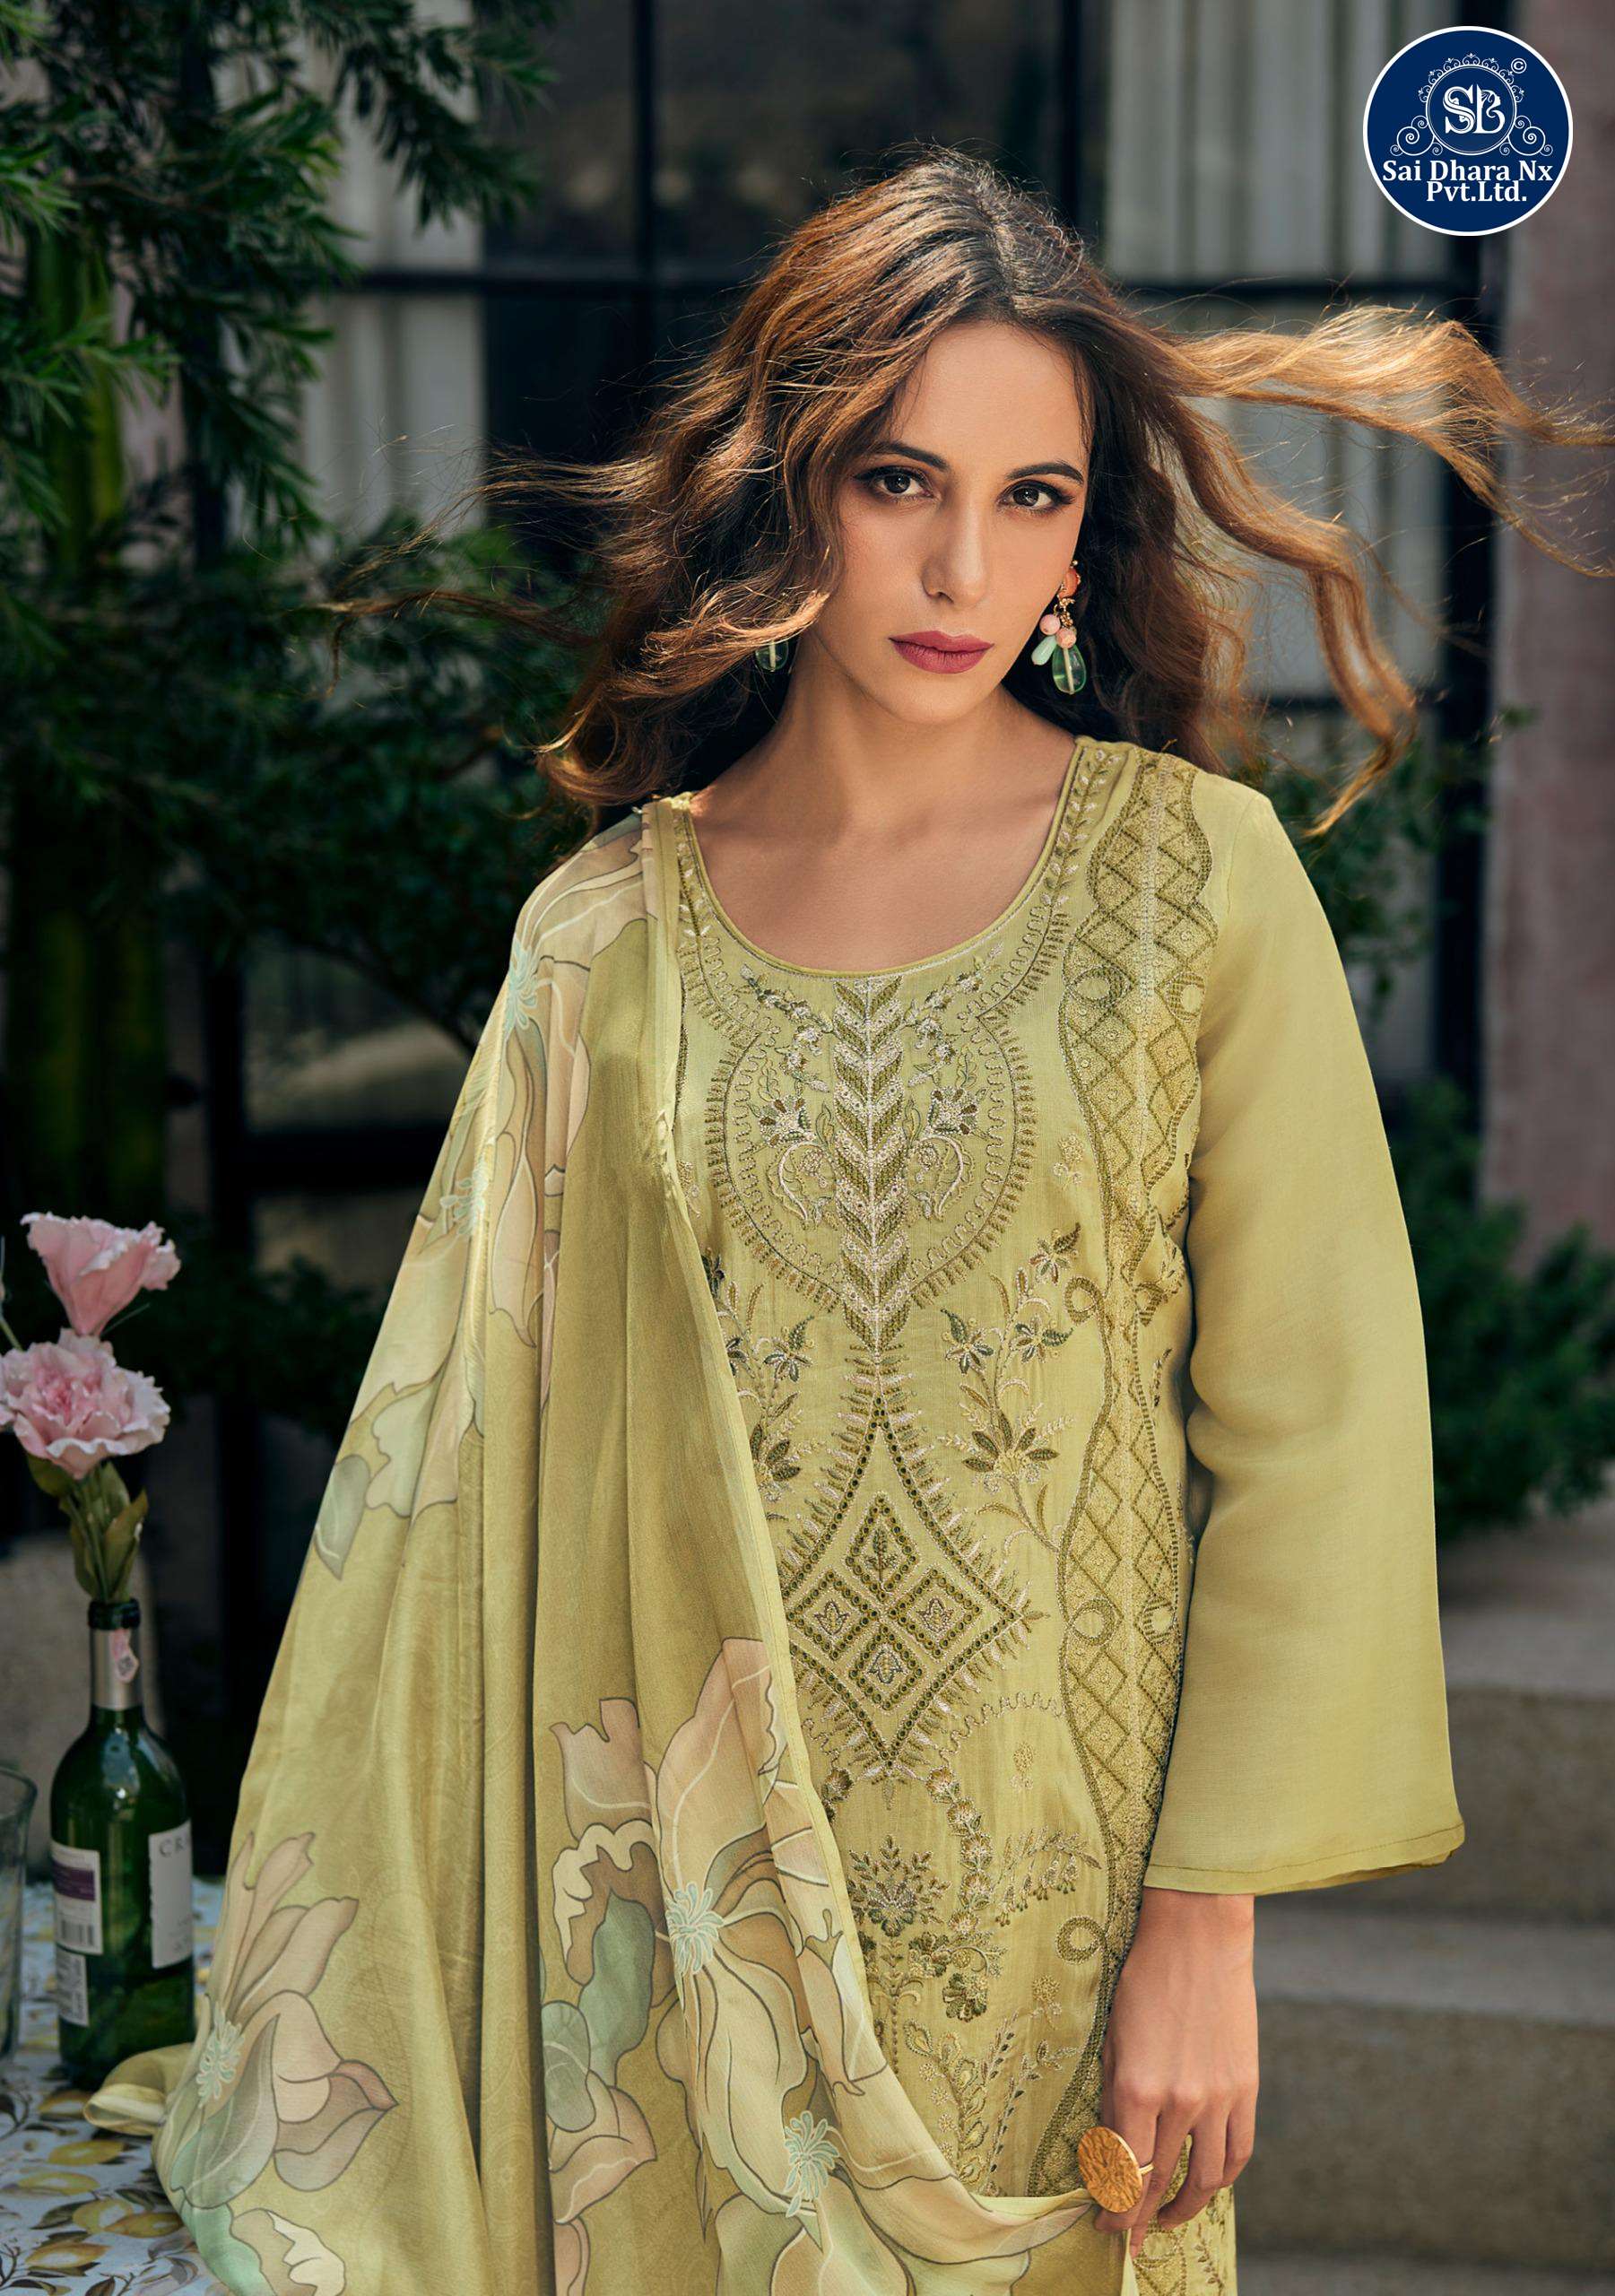  GULL JEE PRESENTS PURE SEAMER SILK HEAVY EMBROIDERY ATTACHED READYMADE SUIT WHOLESALE SHOP IN SURAT - SaiDharaNx